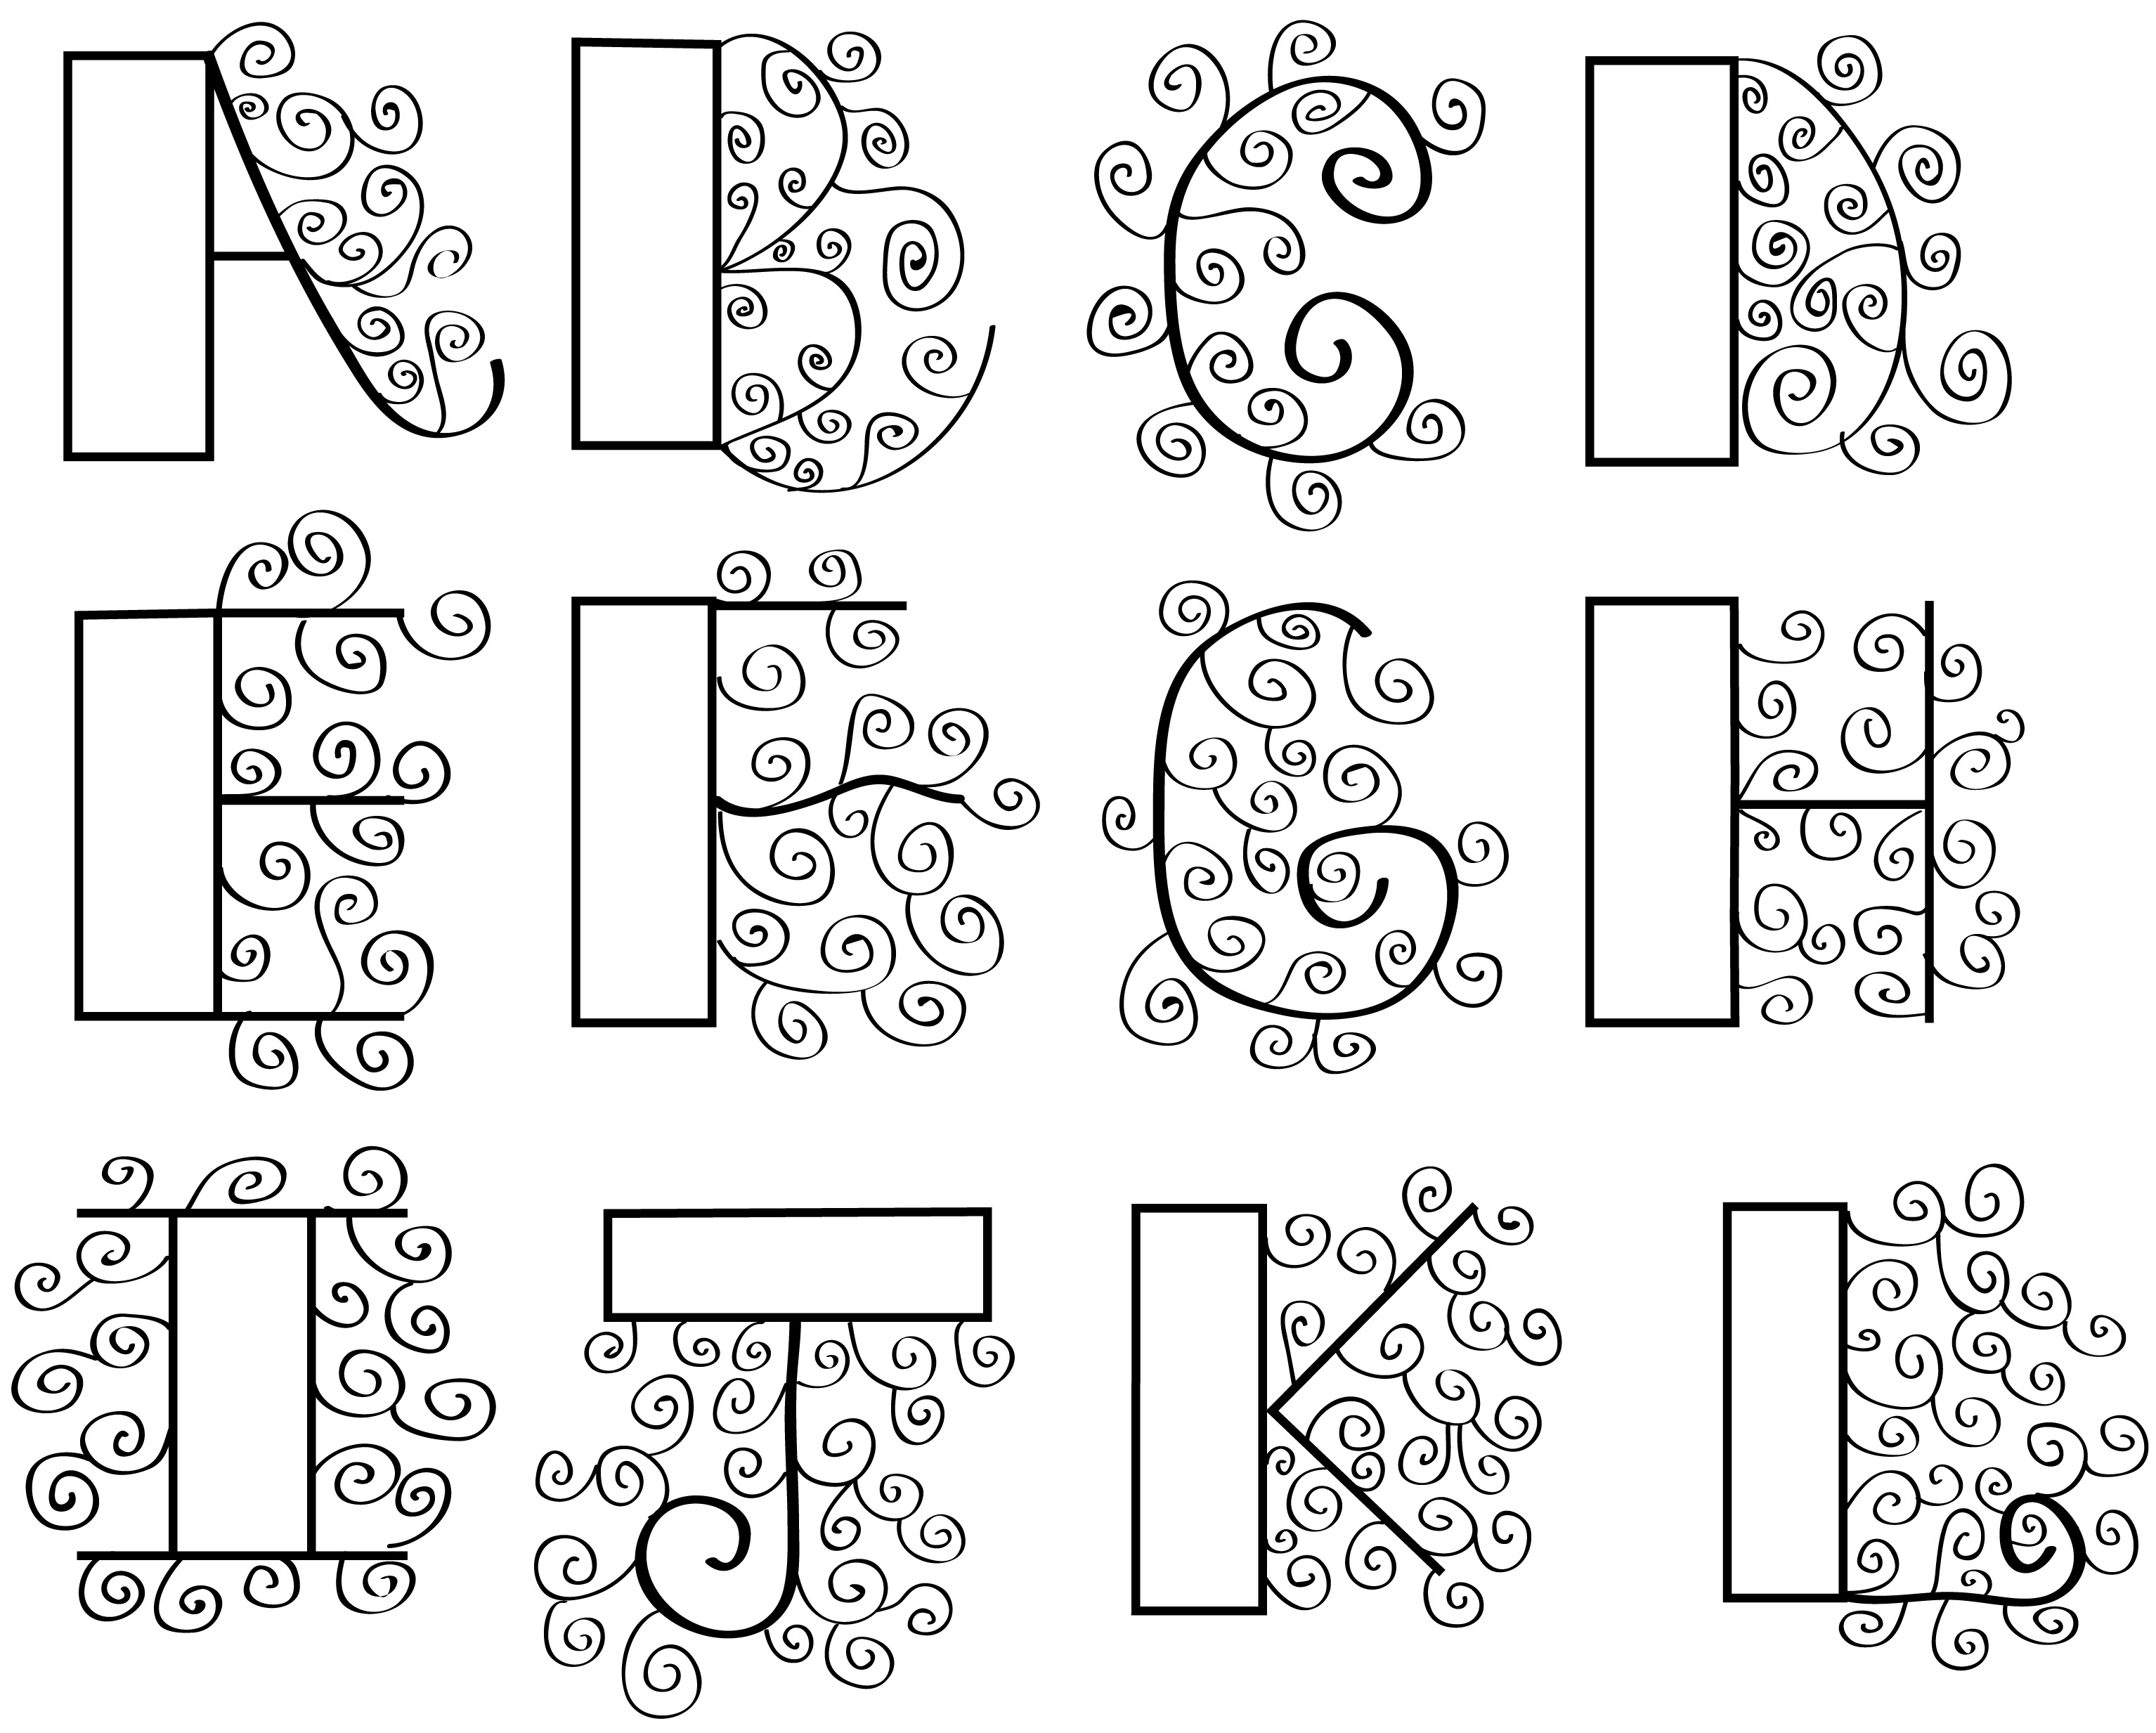 15 Cute Girly Bubble Fonts Images Cute Girly Bubble Letters